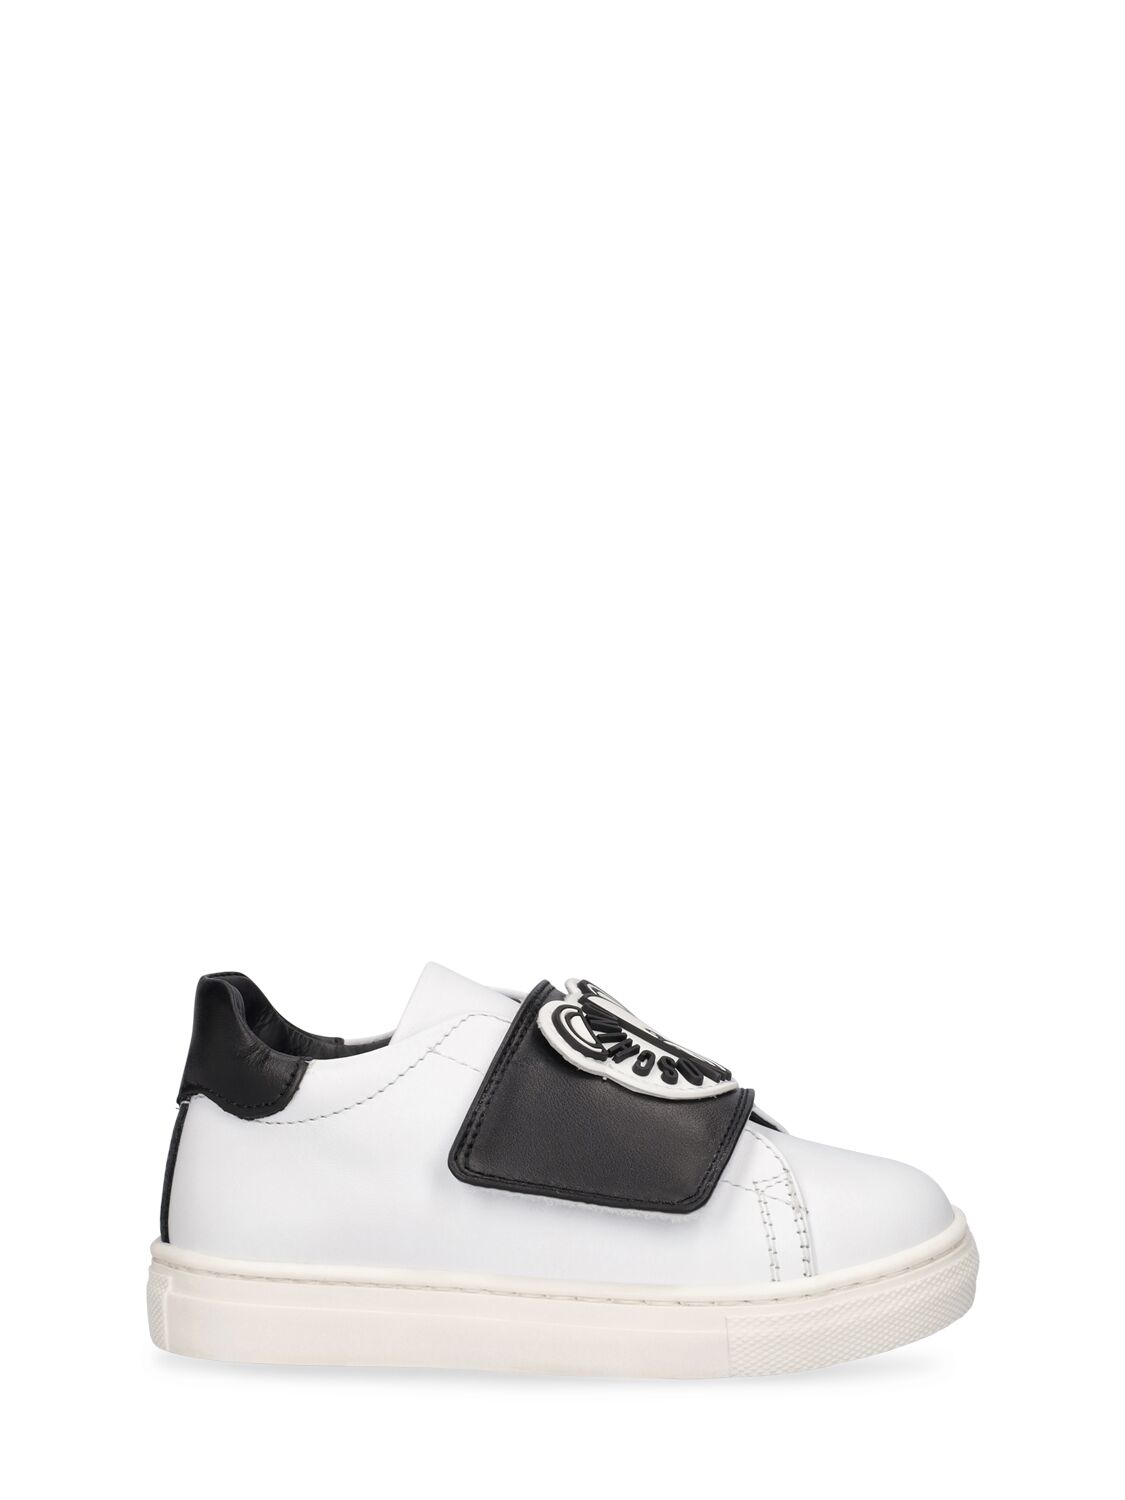 Image of Leather Strap Sneakers W/ Patches